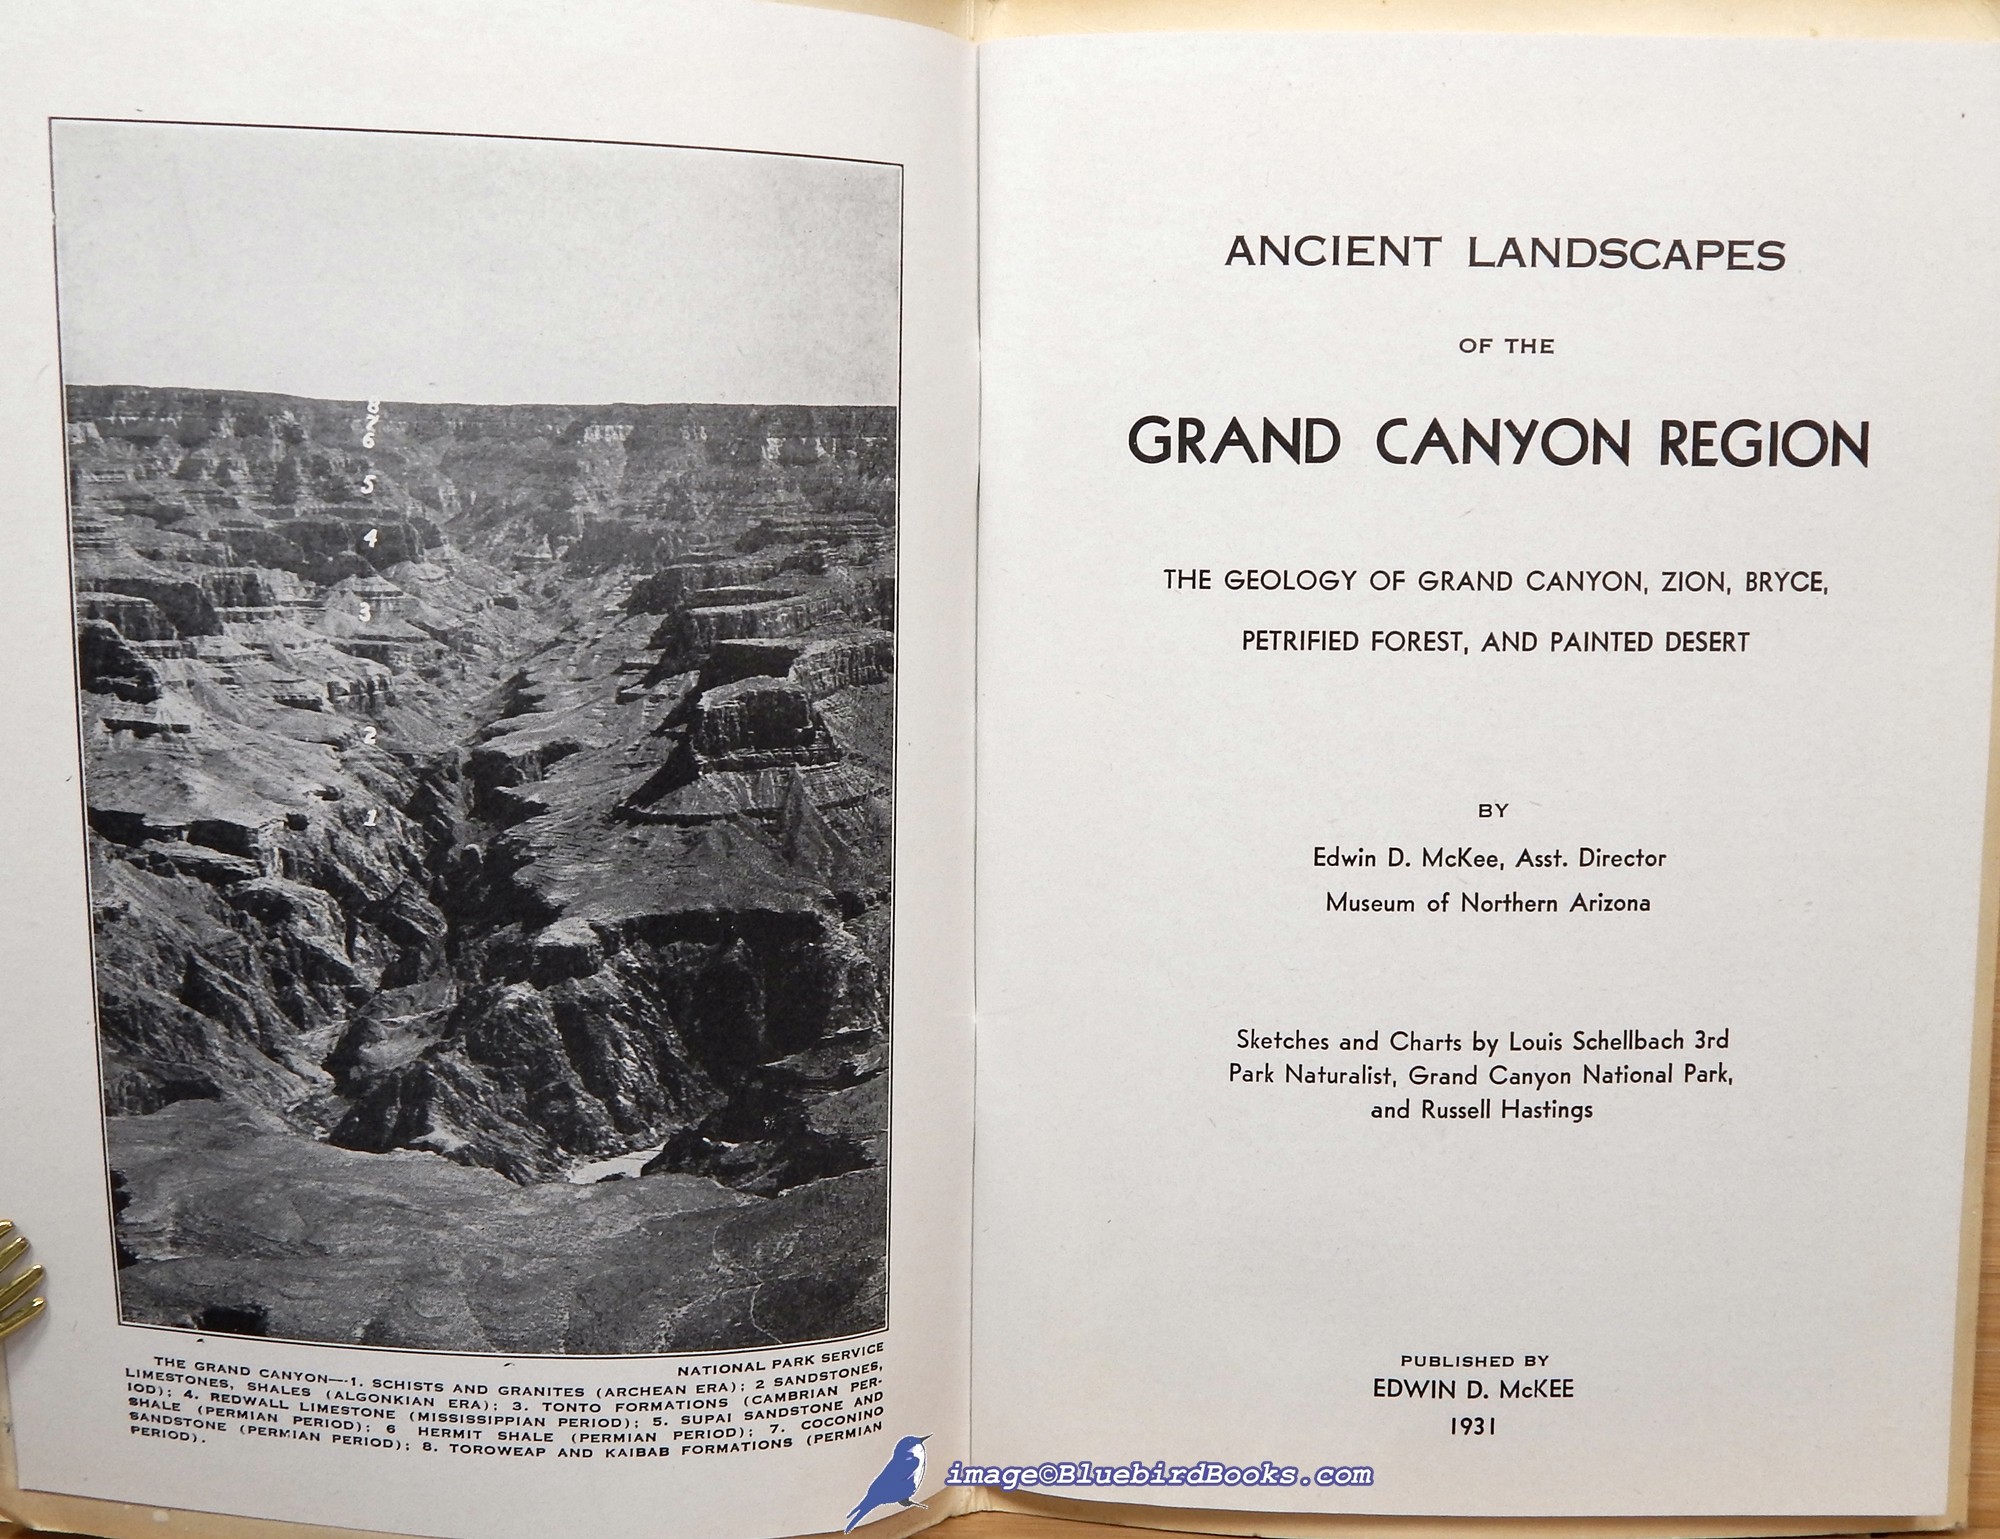 MCKEE, EDWIN D. - Ancient Landscapes of the Grand Canyon Region: The Geology of Grand Canyon, Zion, Bryce, Petrified Forest, and Painted Desert